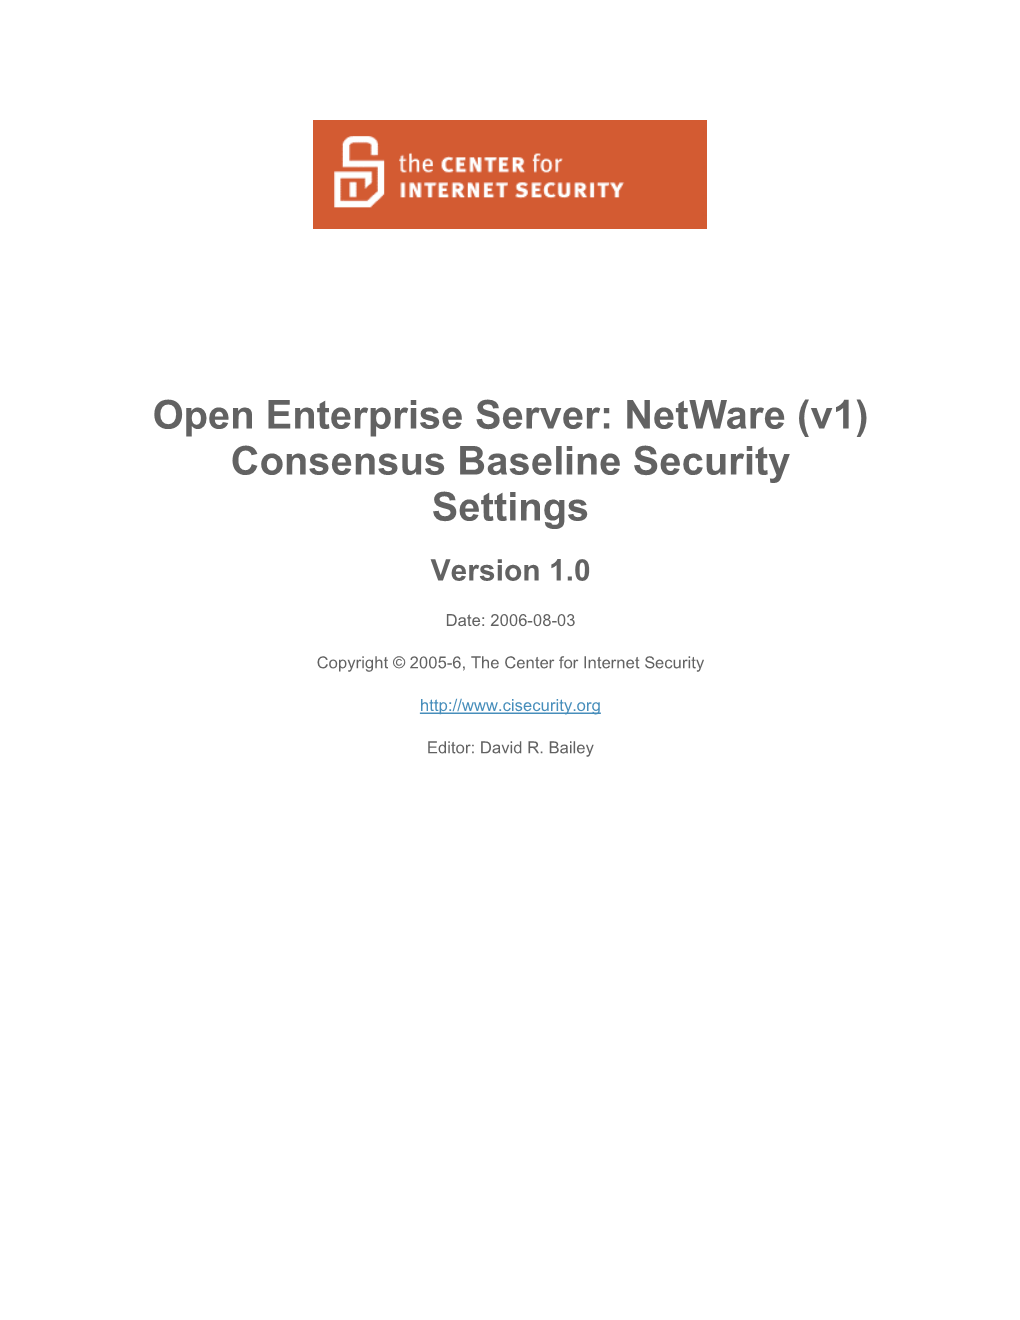 Netware (V1) Consensus Baseline Security Settings Version 1.0